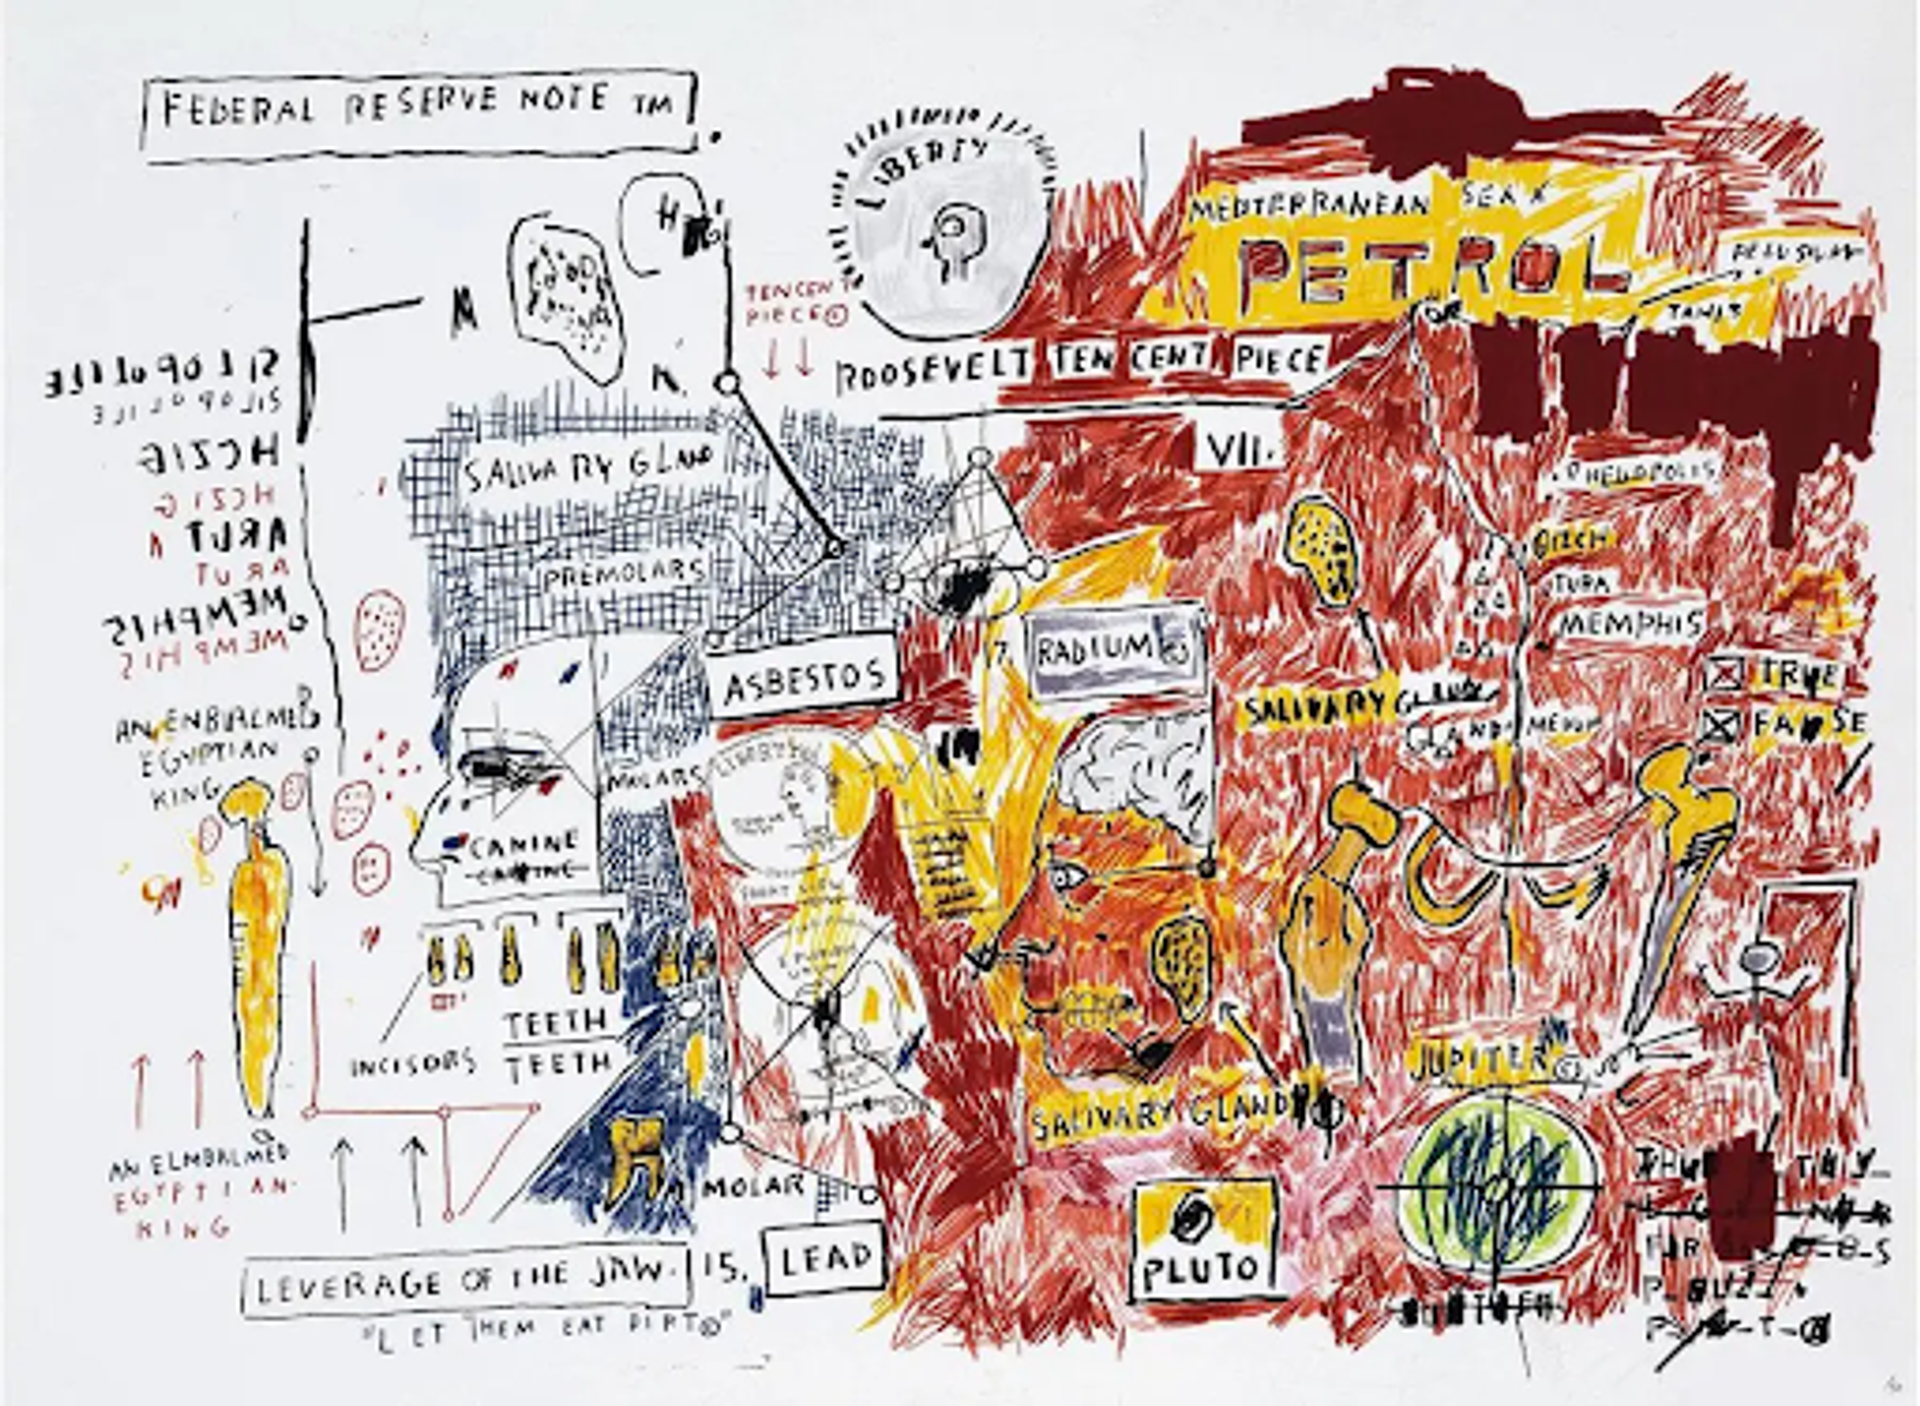 Jean-Michel Basquiat’s Liberty. A Neo Expressionist screenprint of anatomical figures, texts, and images, including red, yellow, and blue colouring.